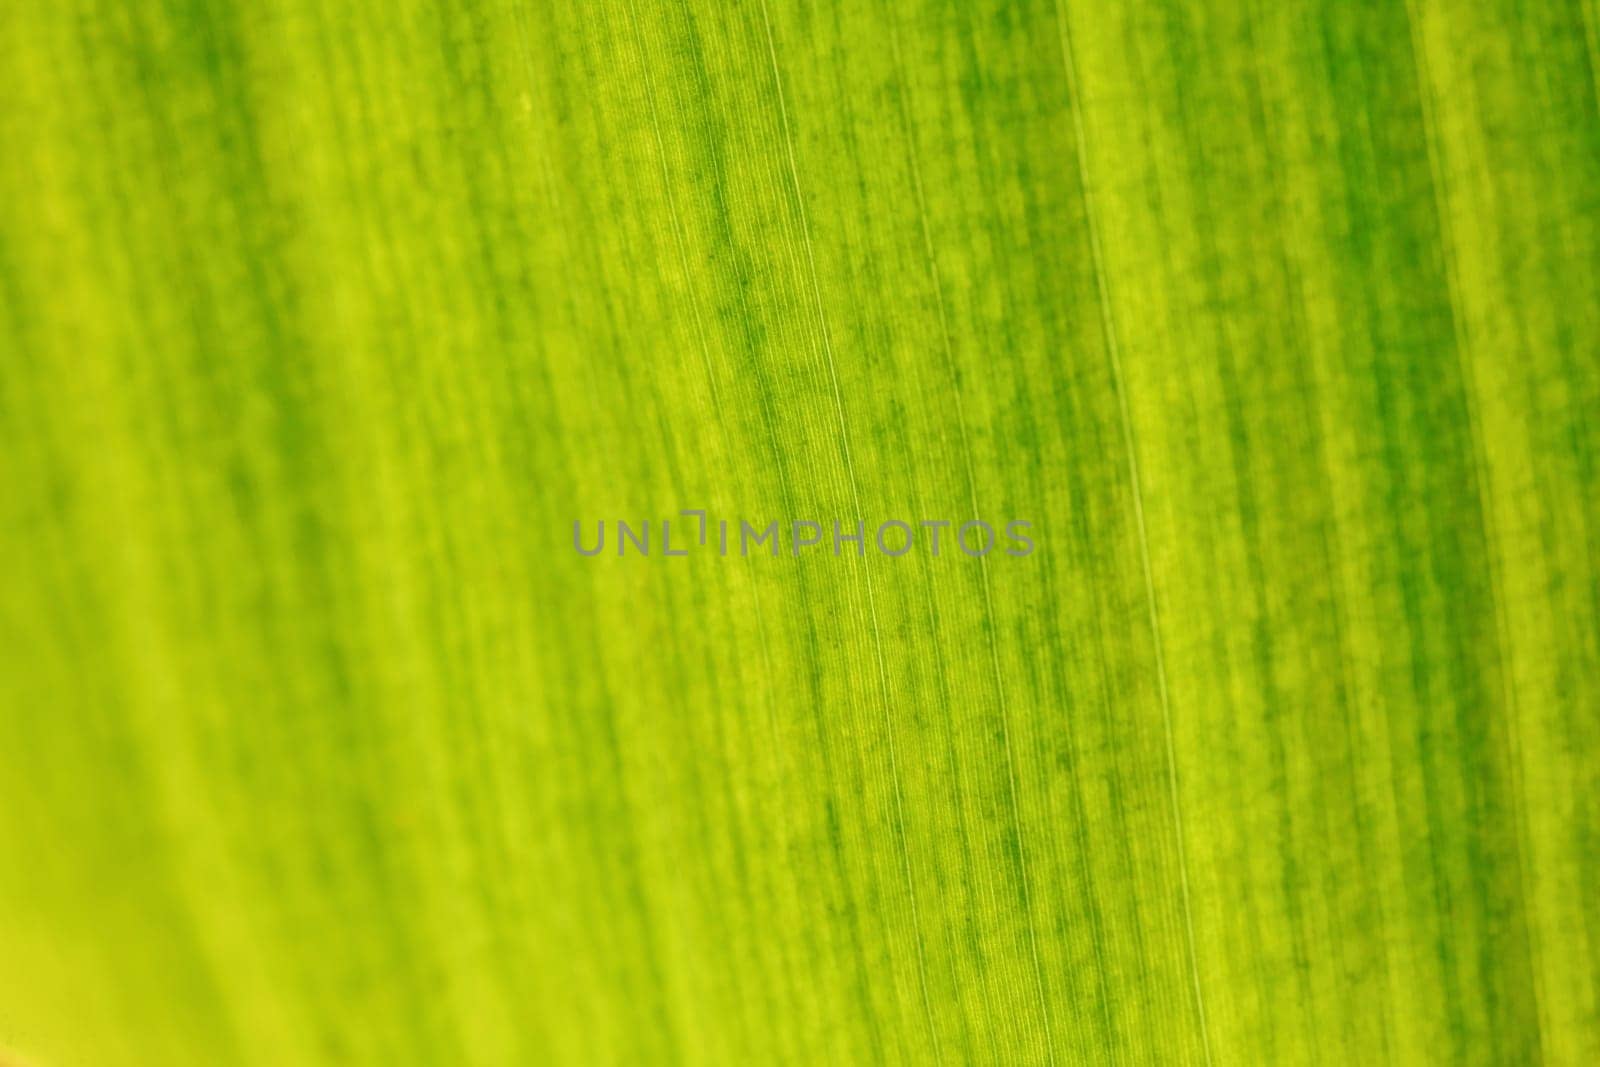 Shallow depth of field photo - only few fibers in focus. Banana tree leaf lit by sun from other side. Abstract tropical organic background. by Ivanko